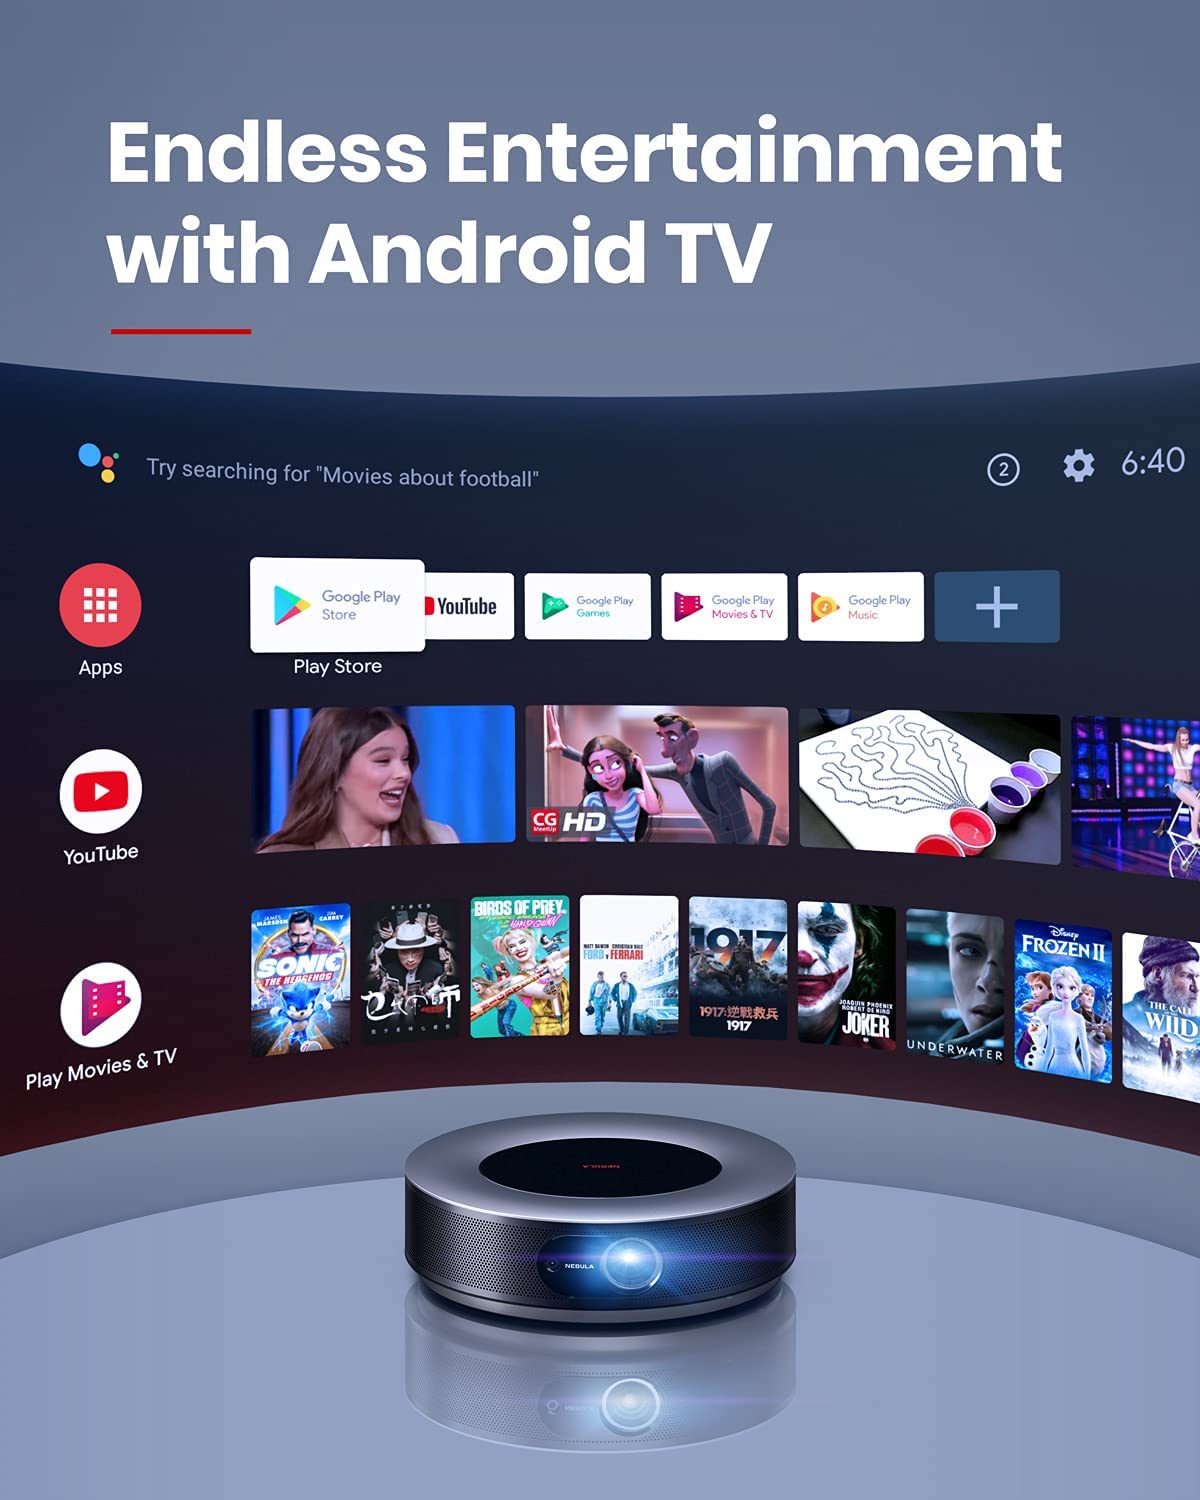 Enjoy endless entertainment with Android TV on Nebula Cosmos.